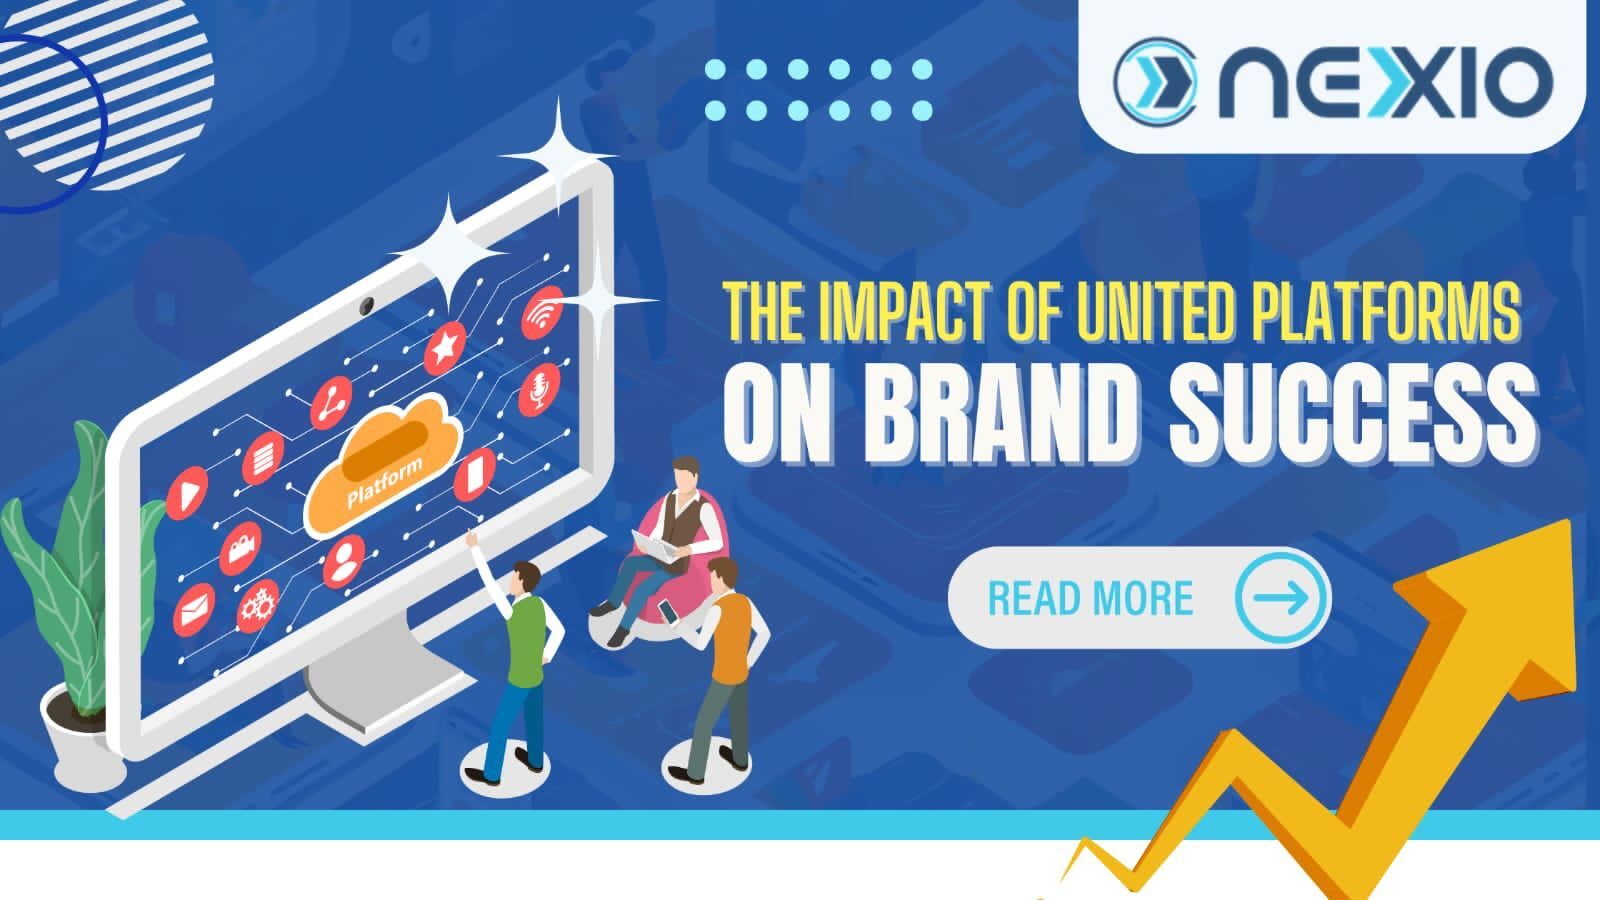 “The Impact of Unified Platforms on Brand Success”